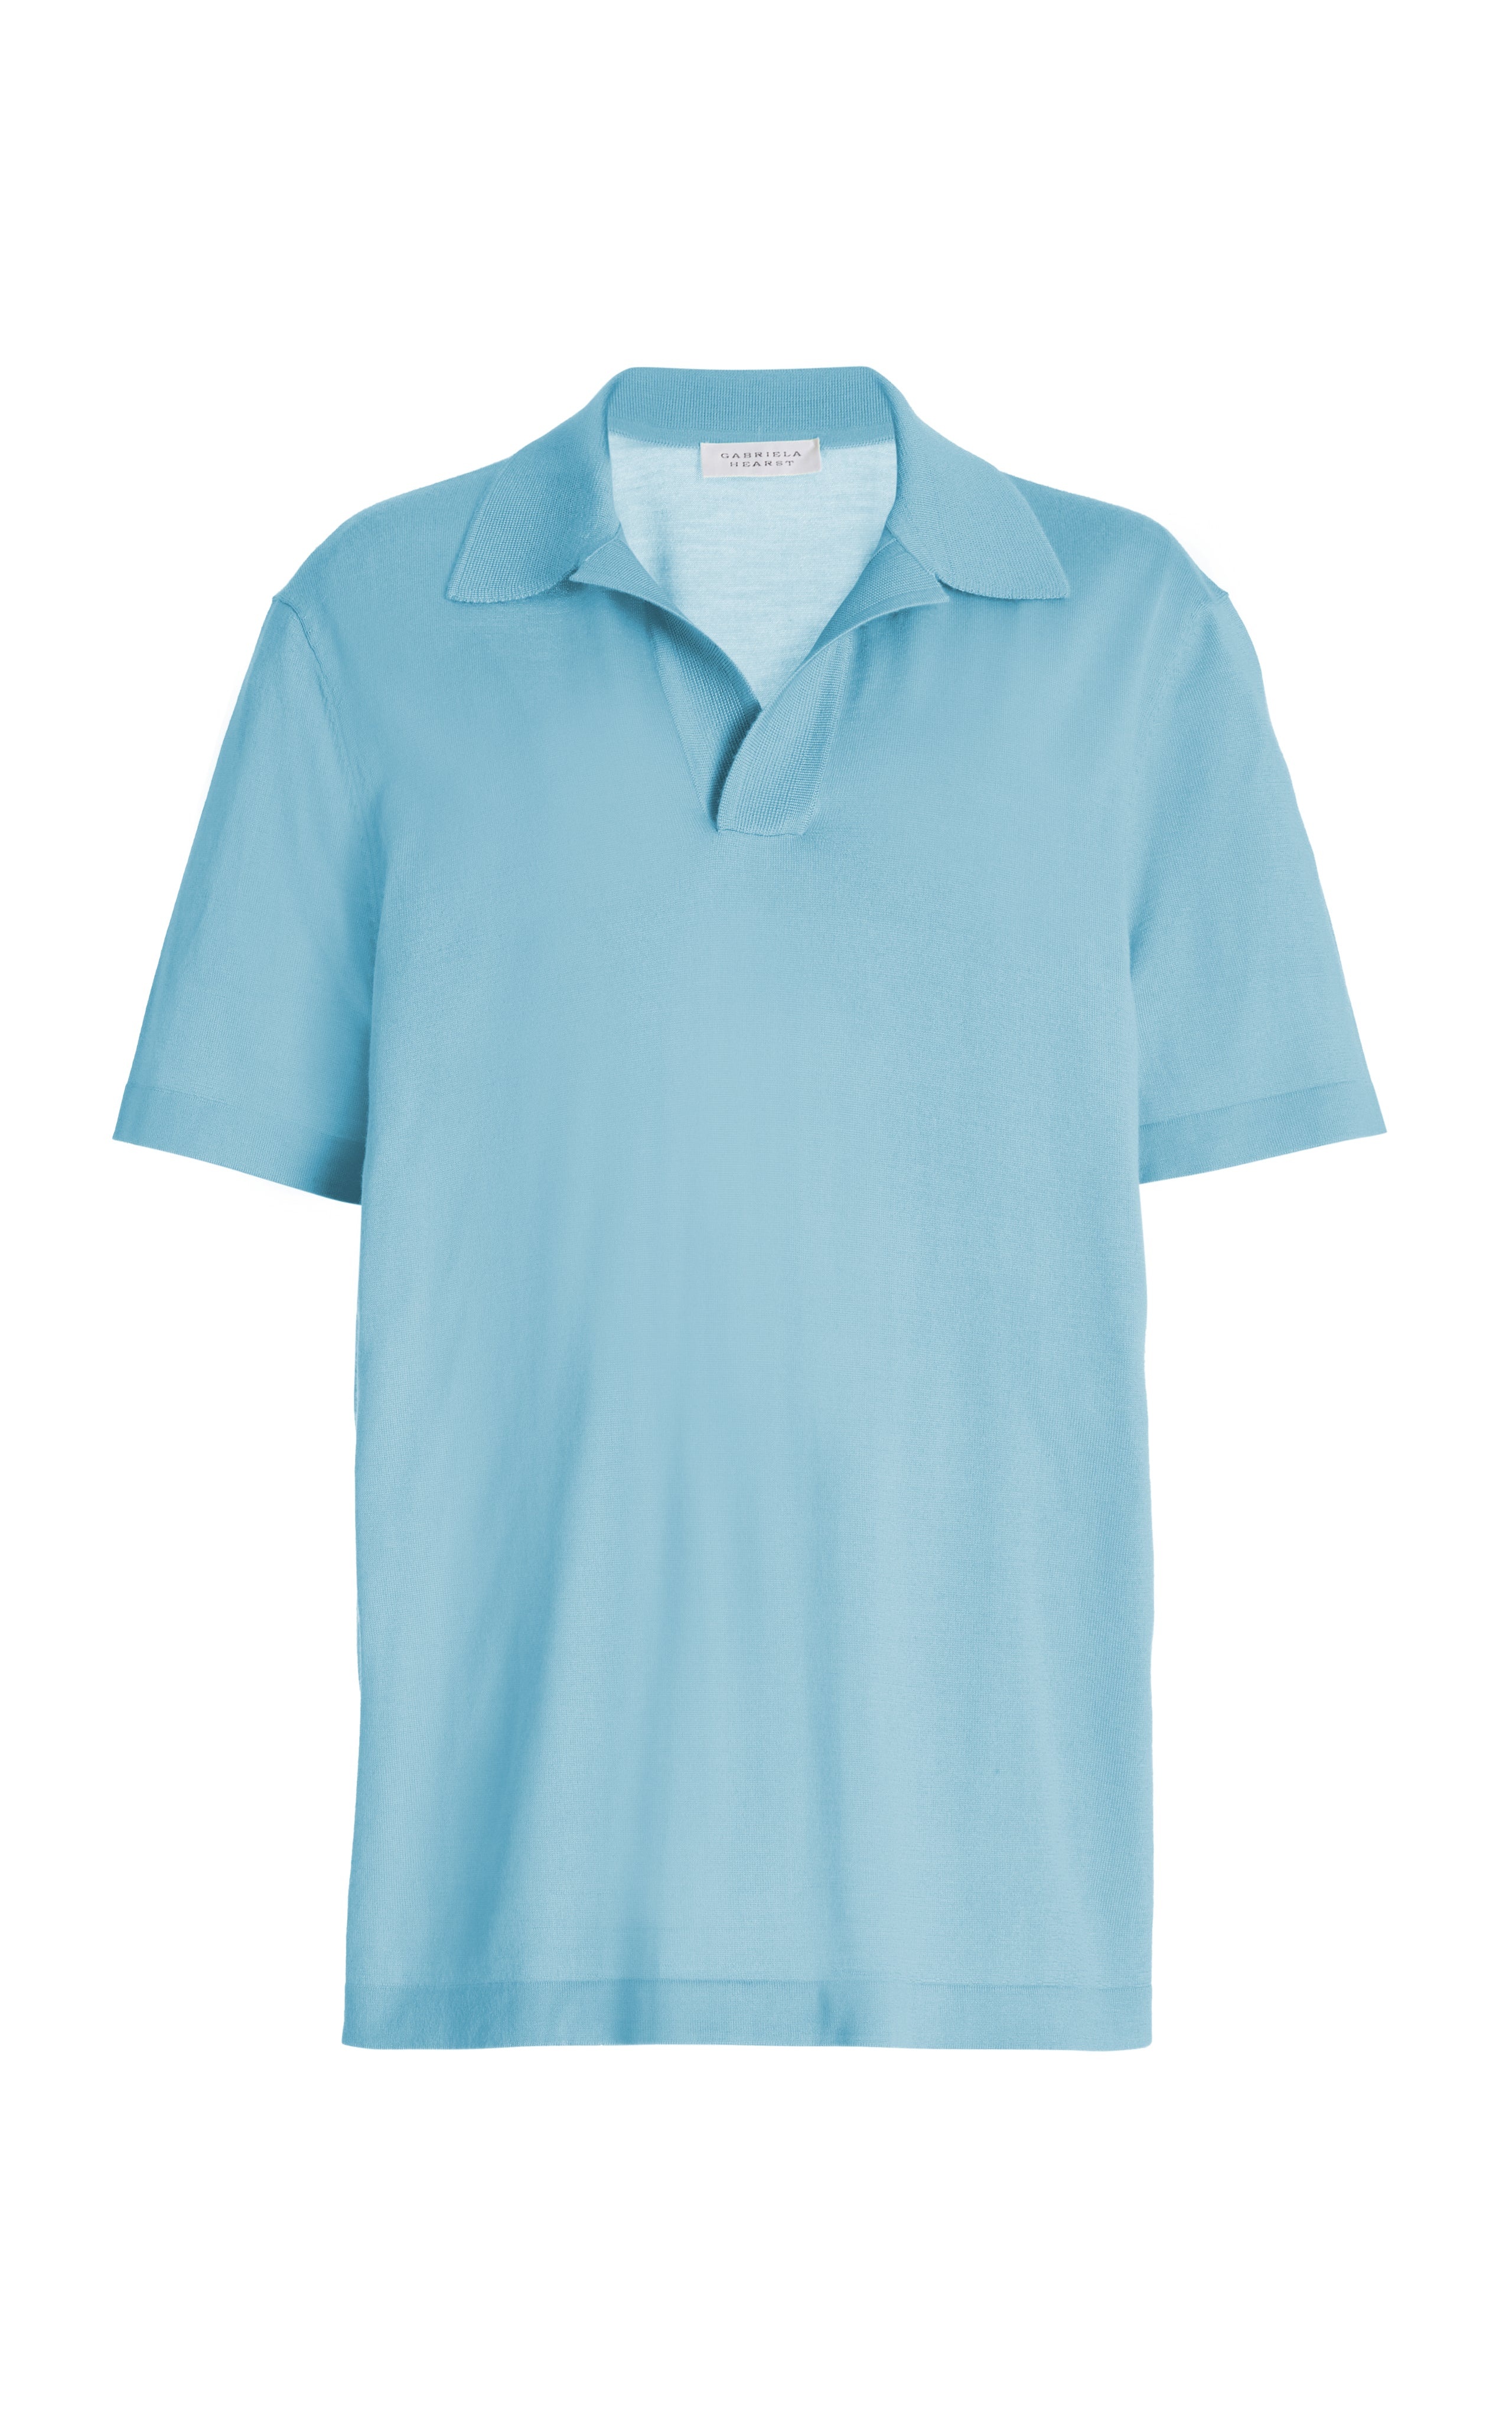 Stendhal Knit Short Sleeve Polo in Mineral Blue Cashmere - 1